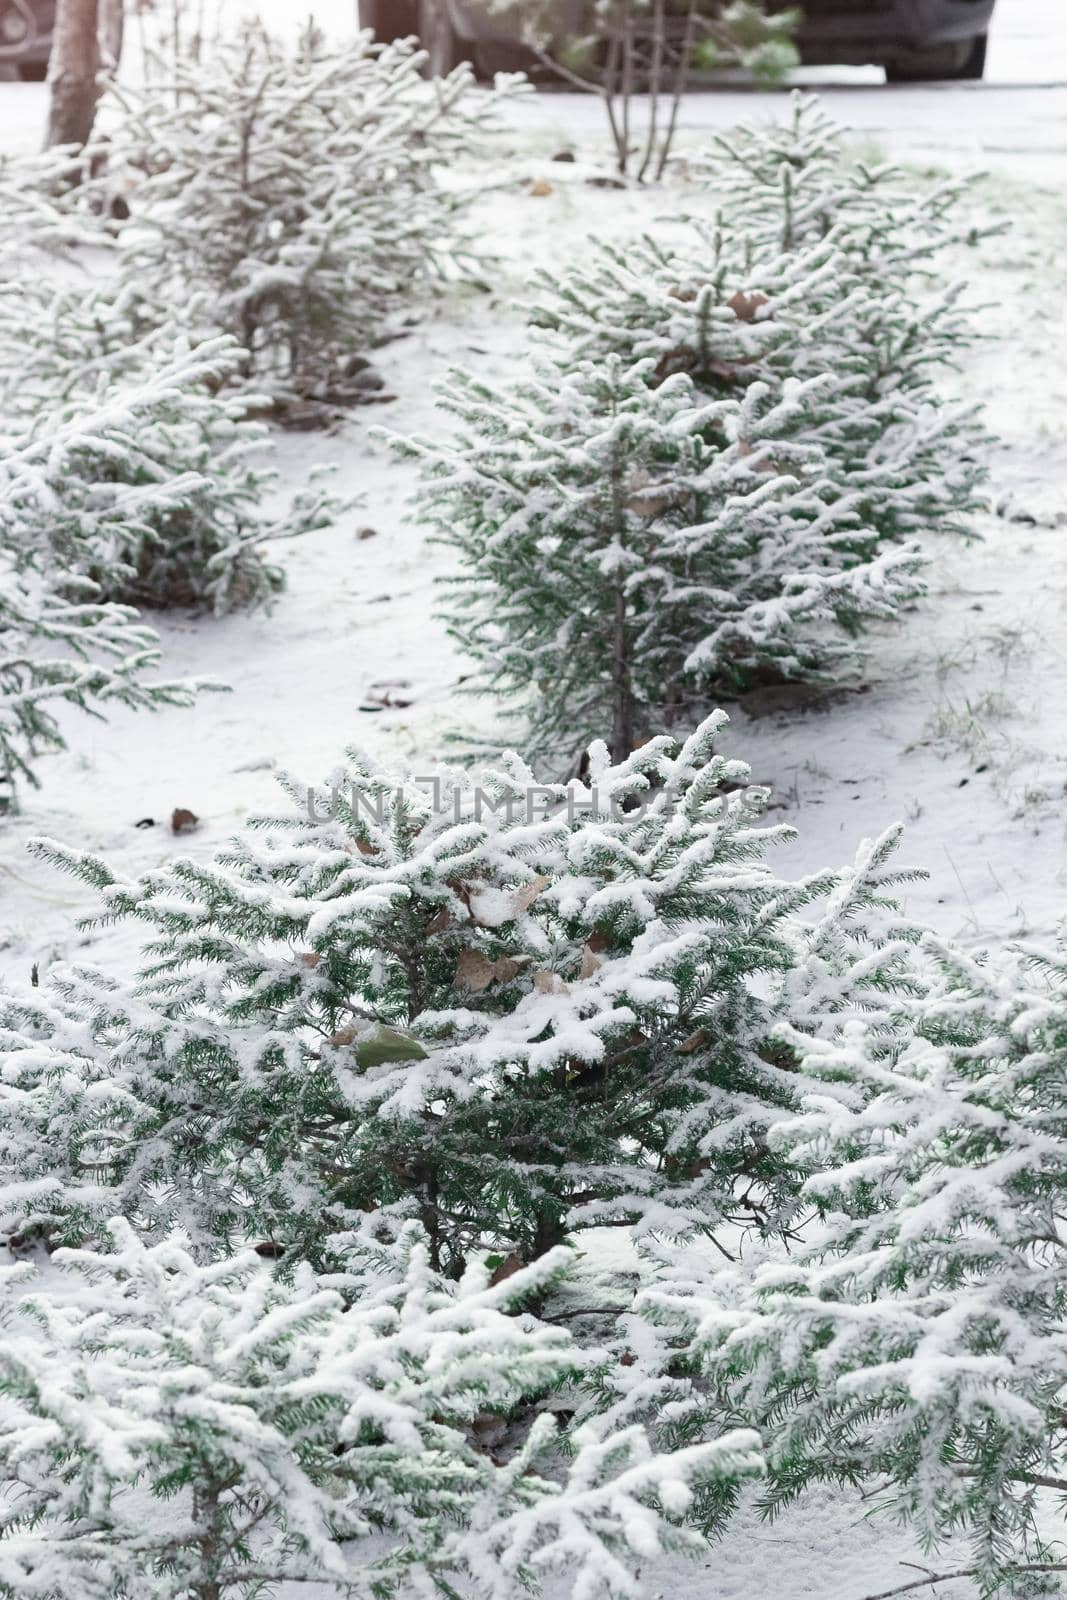 Fir group of little cute Christmas trees with first snow, young spruces in a row under snowy flakes, winter onset season, vertical image